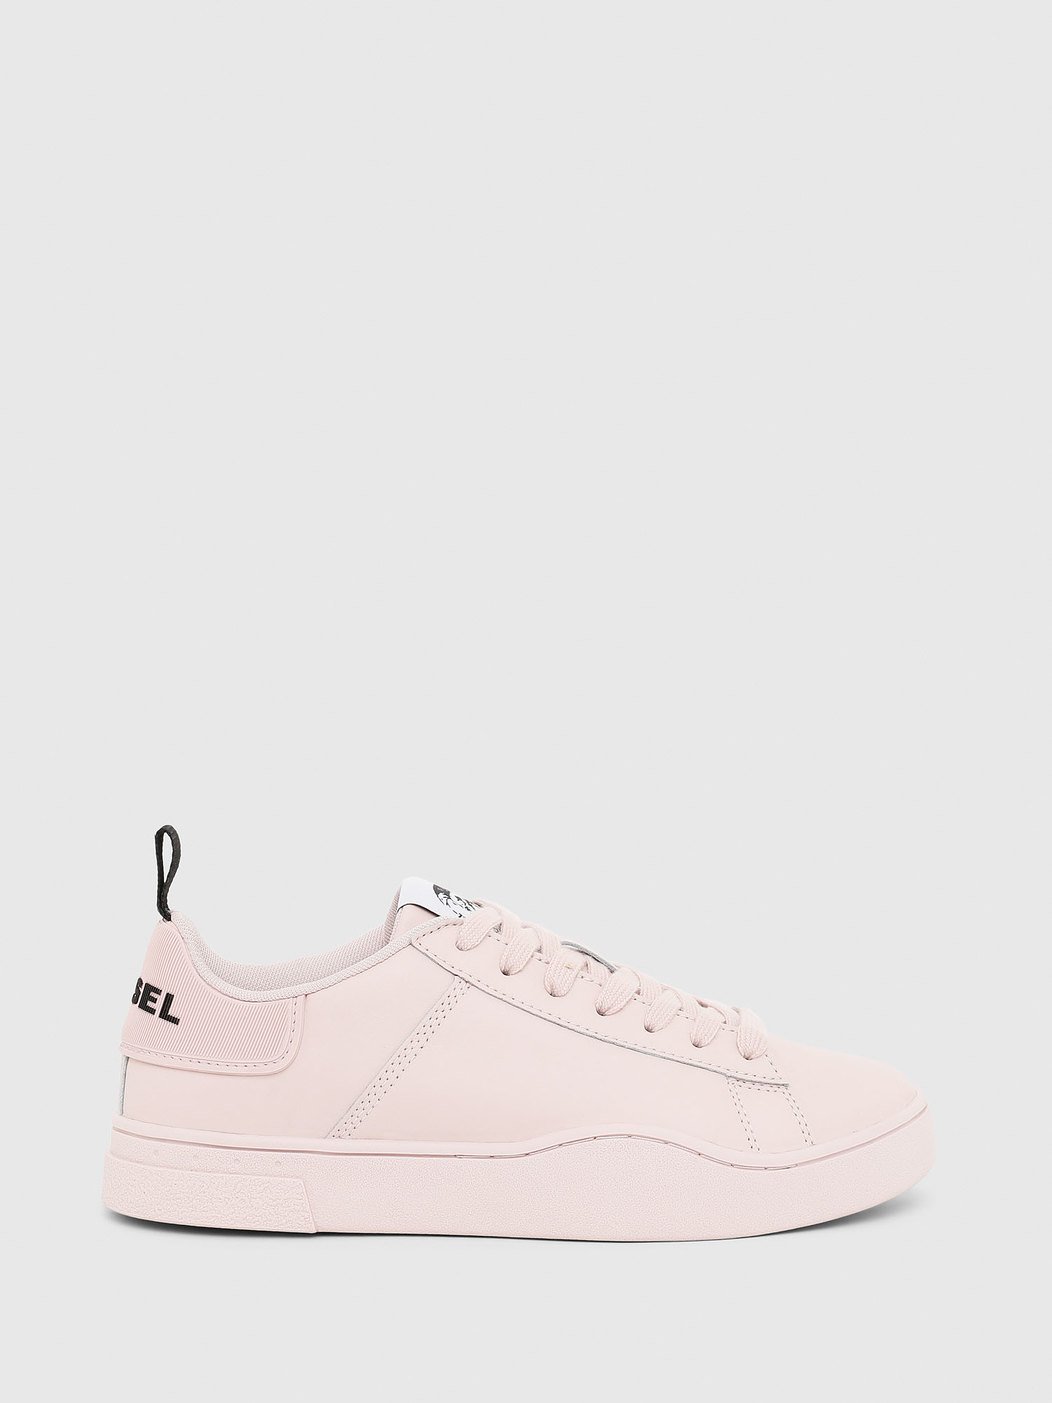 Monochrome Low-Top Sneakers In Leather